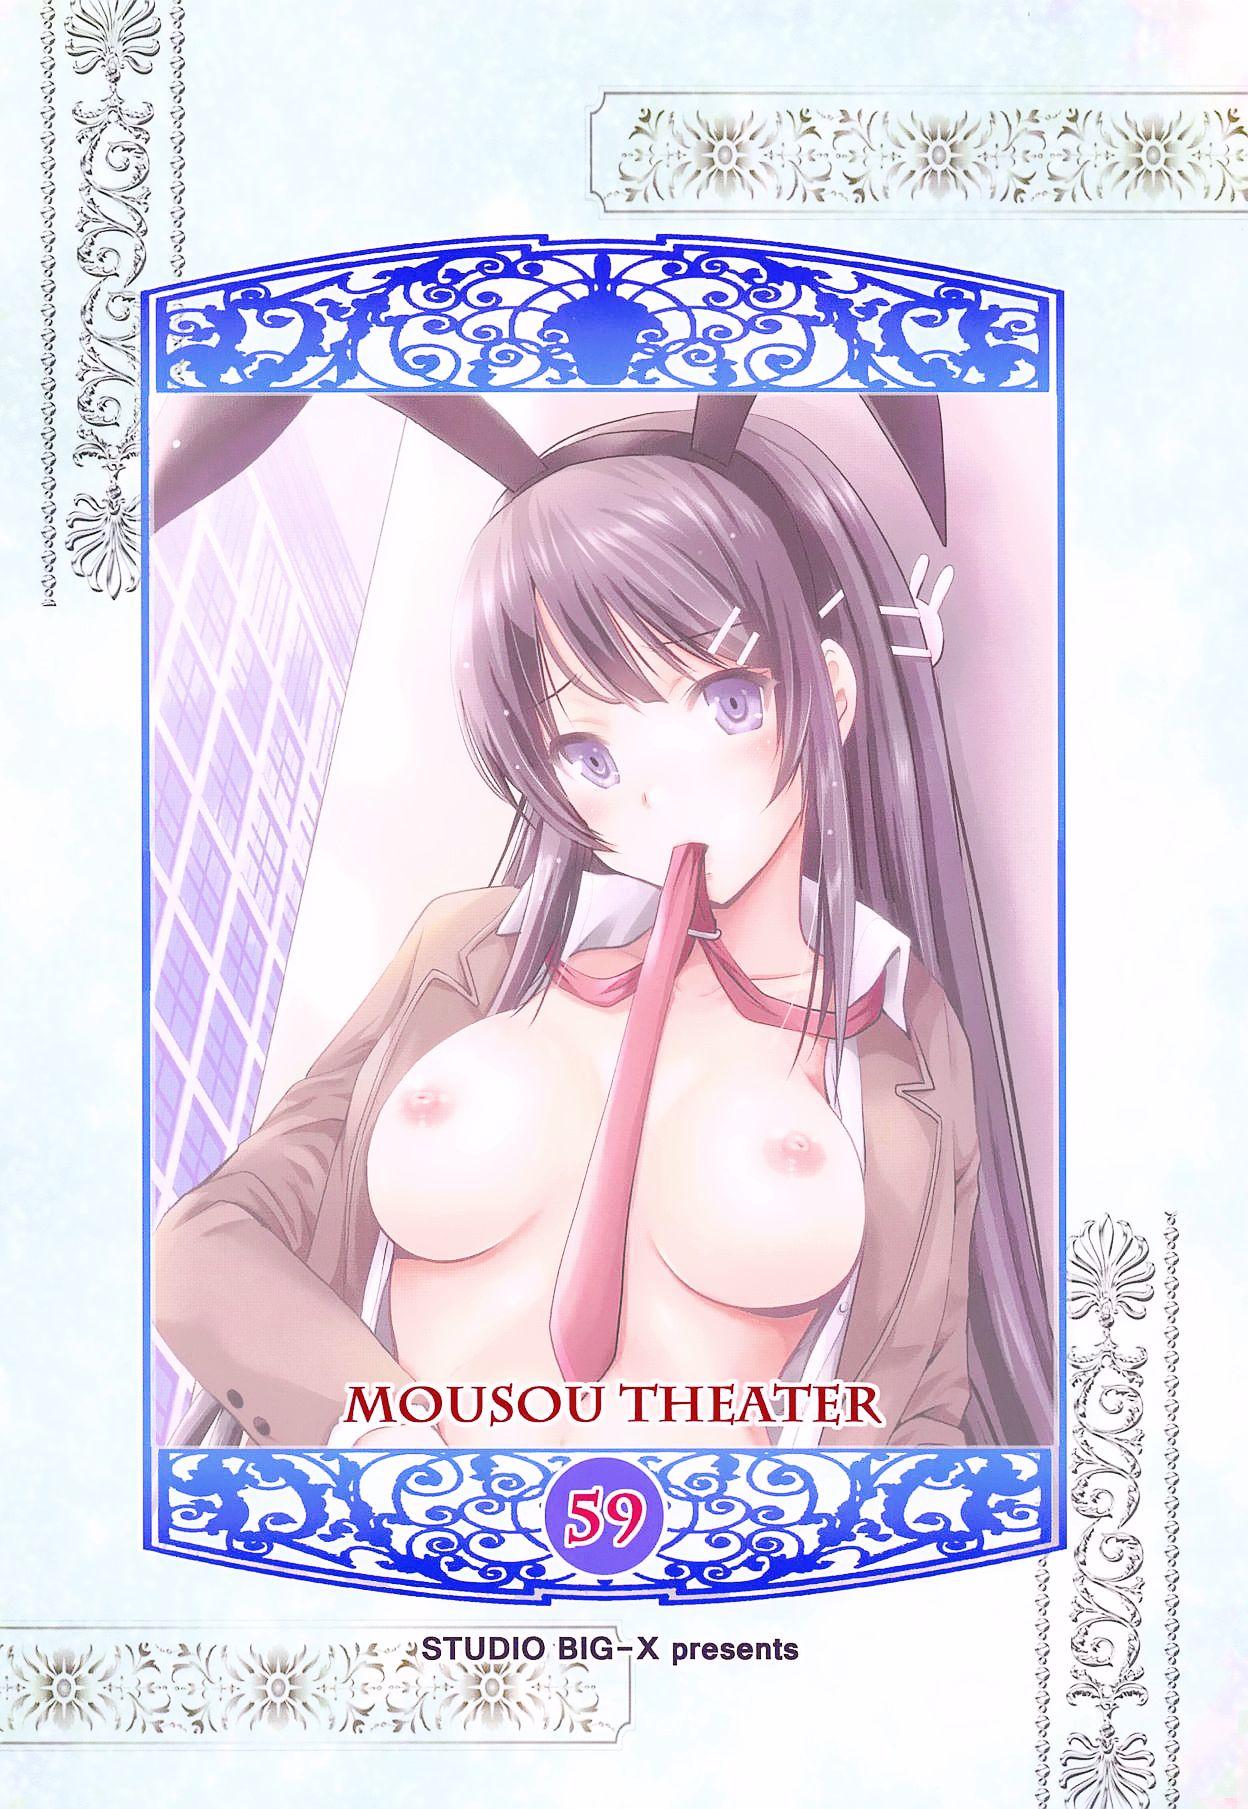 MOUSOU THEATER 59 26